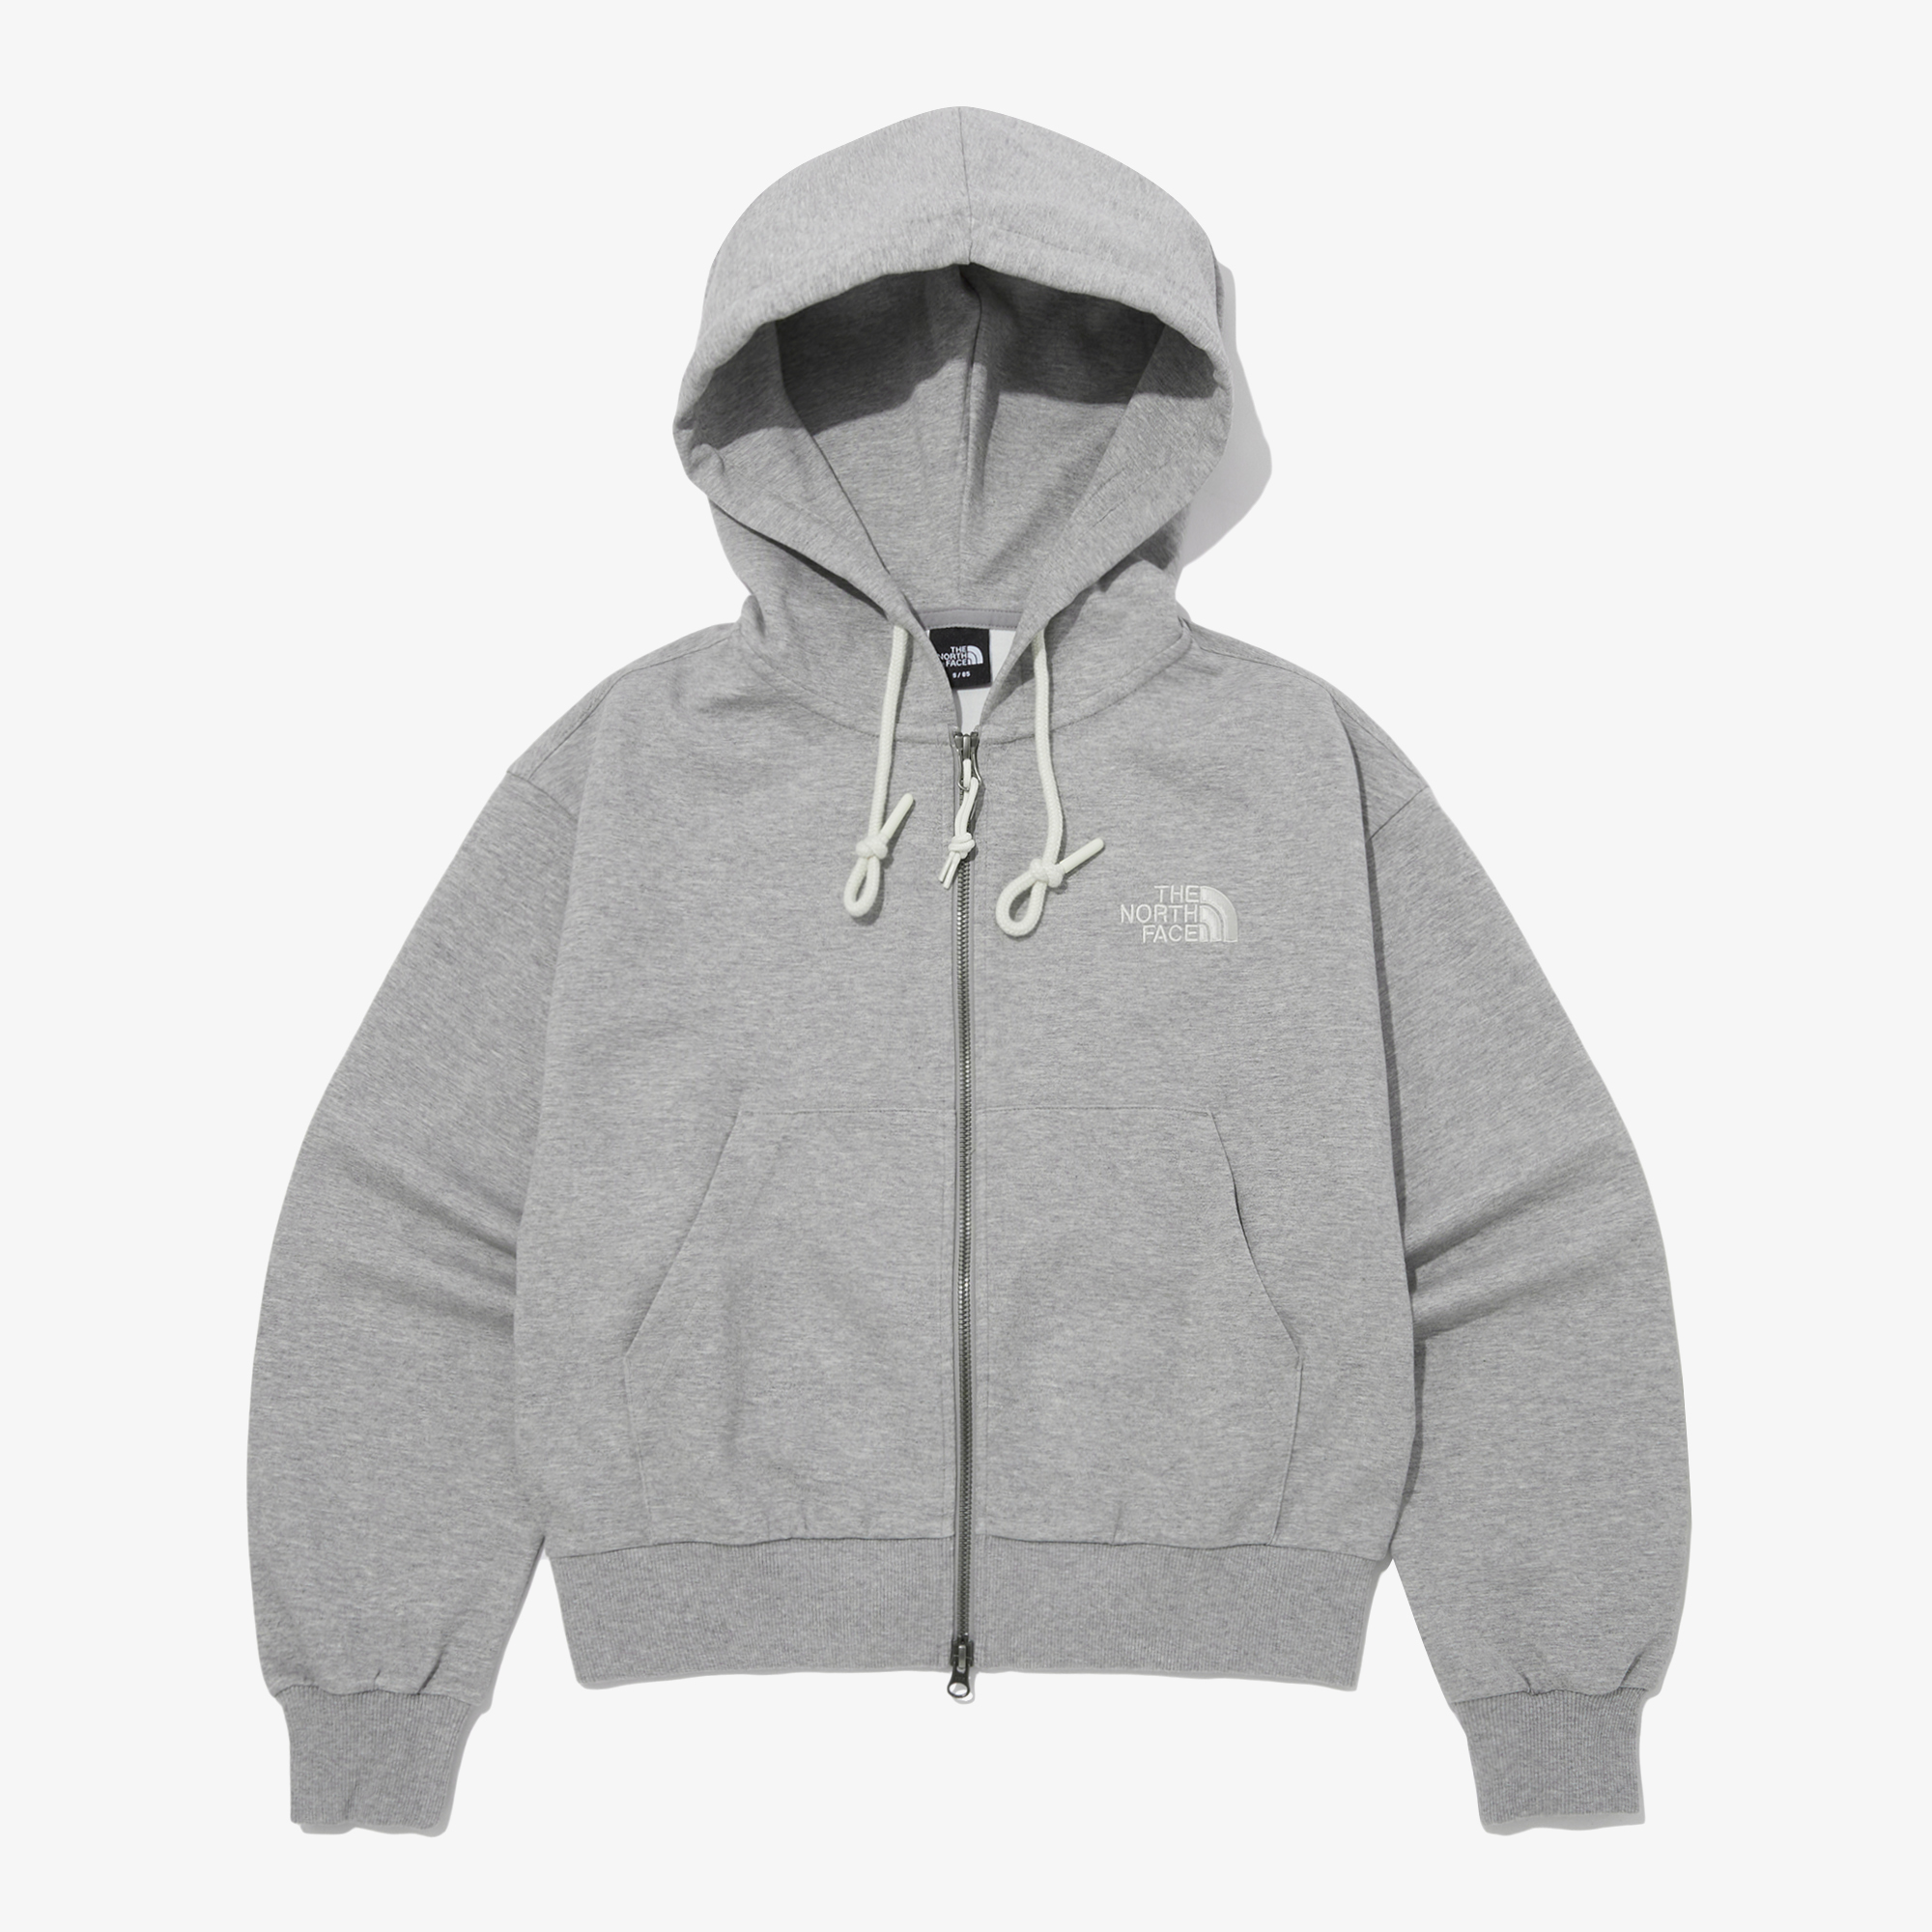 THE NORTH FACE SEED TECH HOOD ZIP UP 女款短版棉質外套